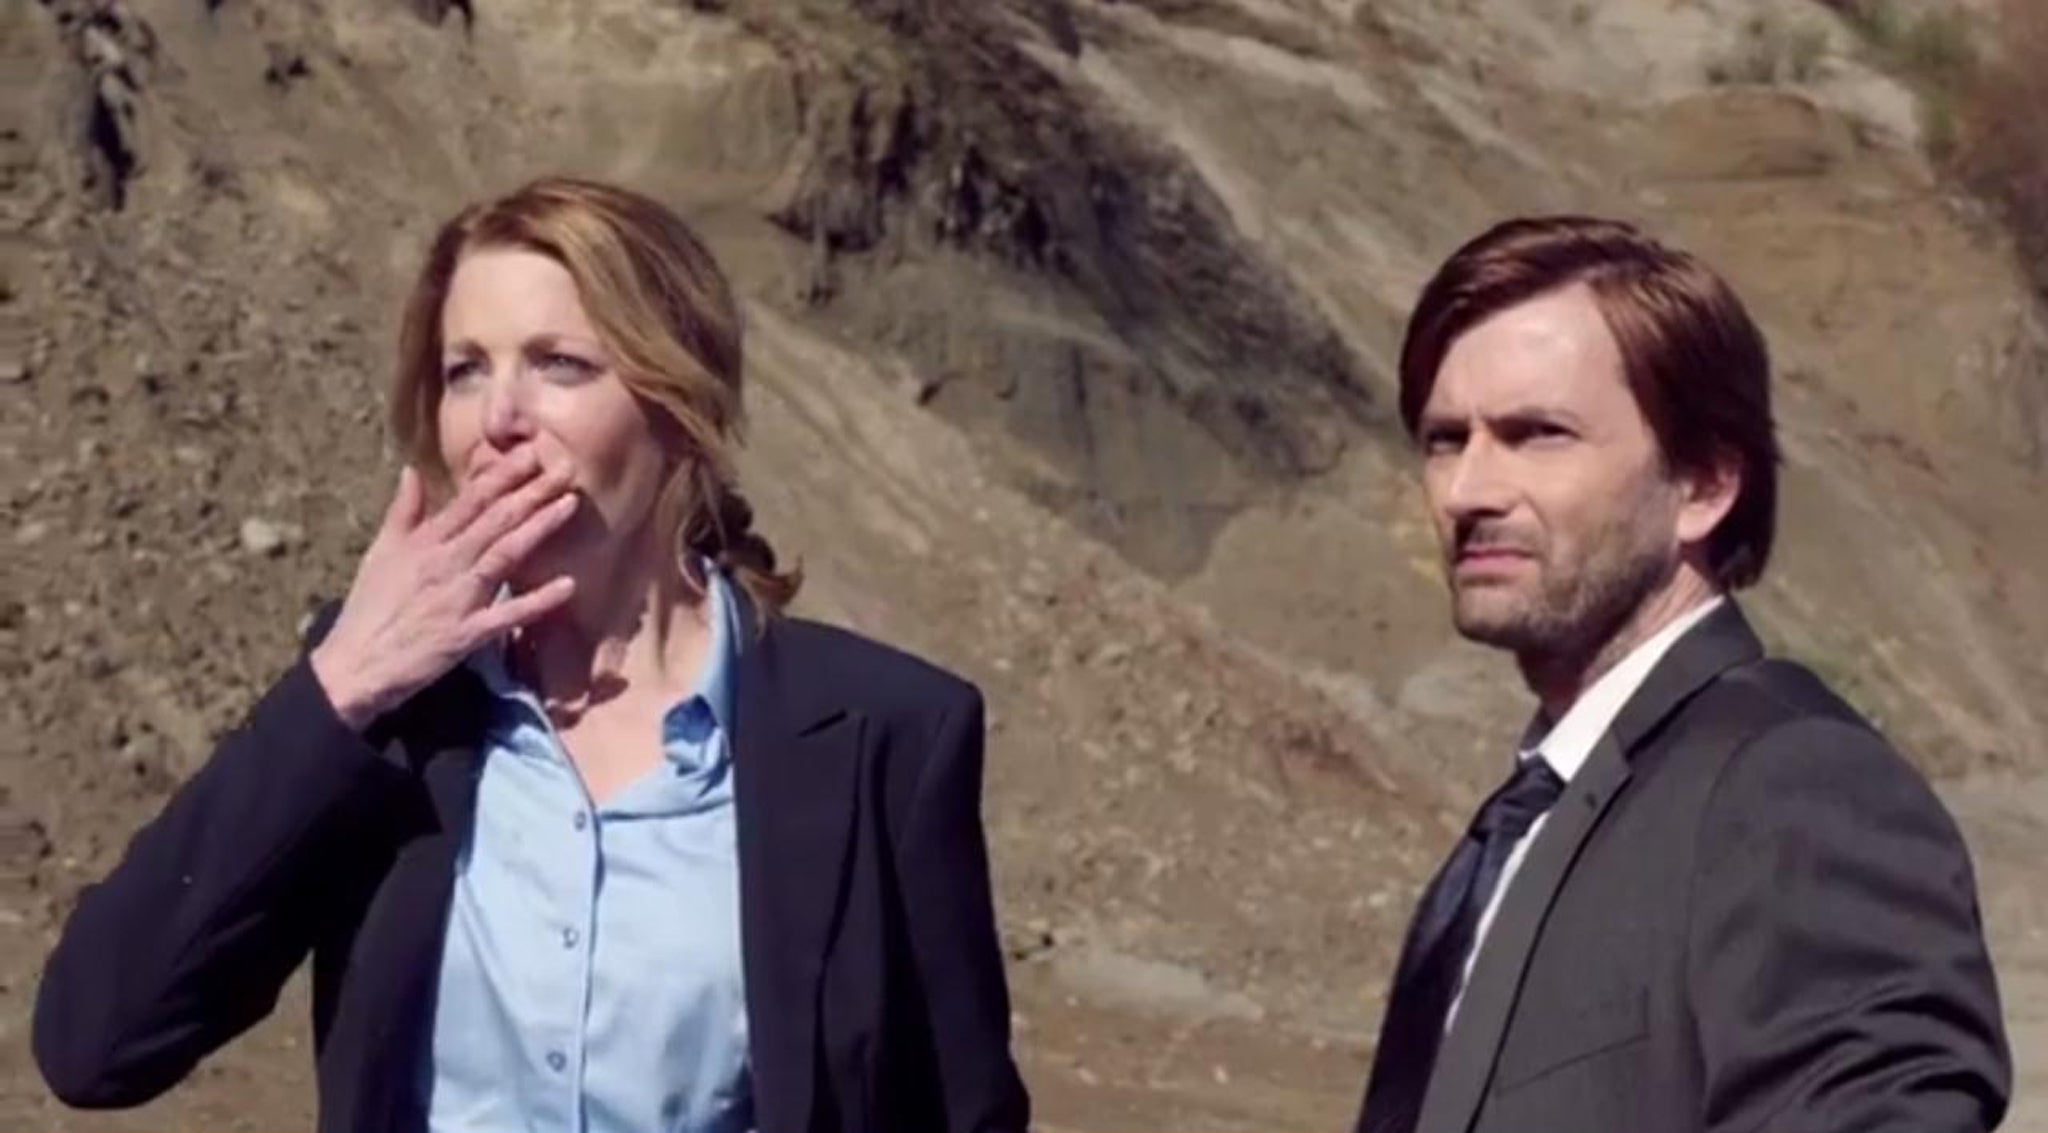 Anna Gunn and David Tennant star in Gracepoint, the US version of Broadchurch